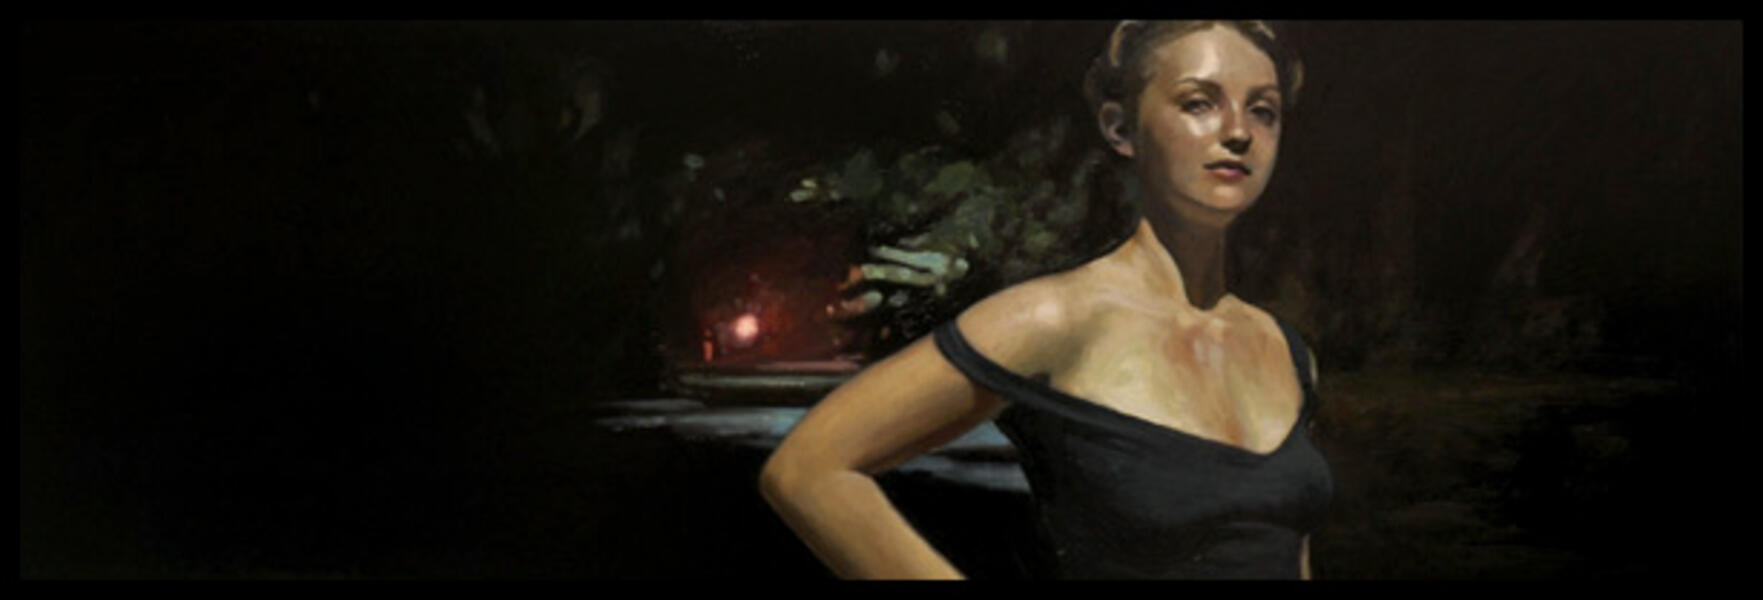 Streetlight - 16x36 inches - Oil on canvas - 2008